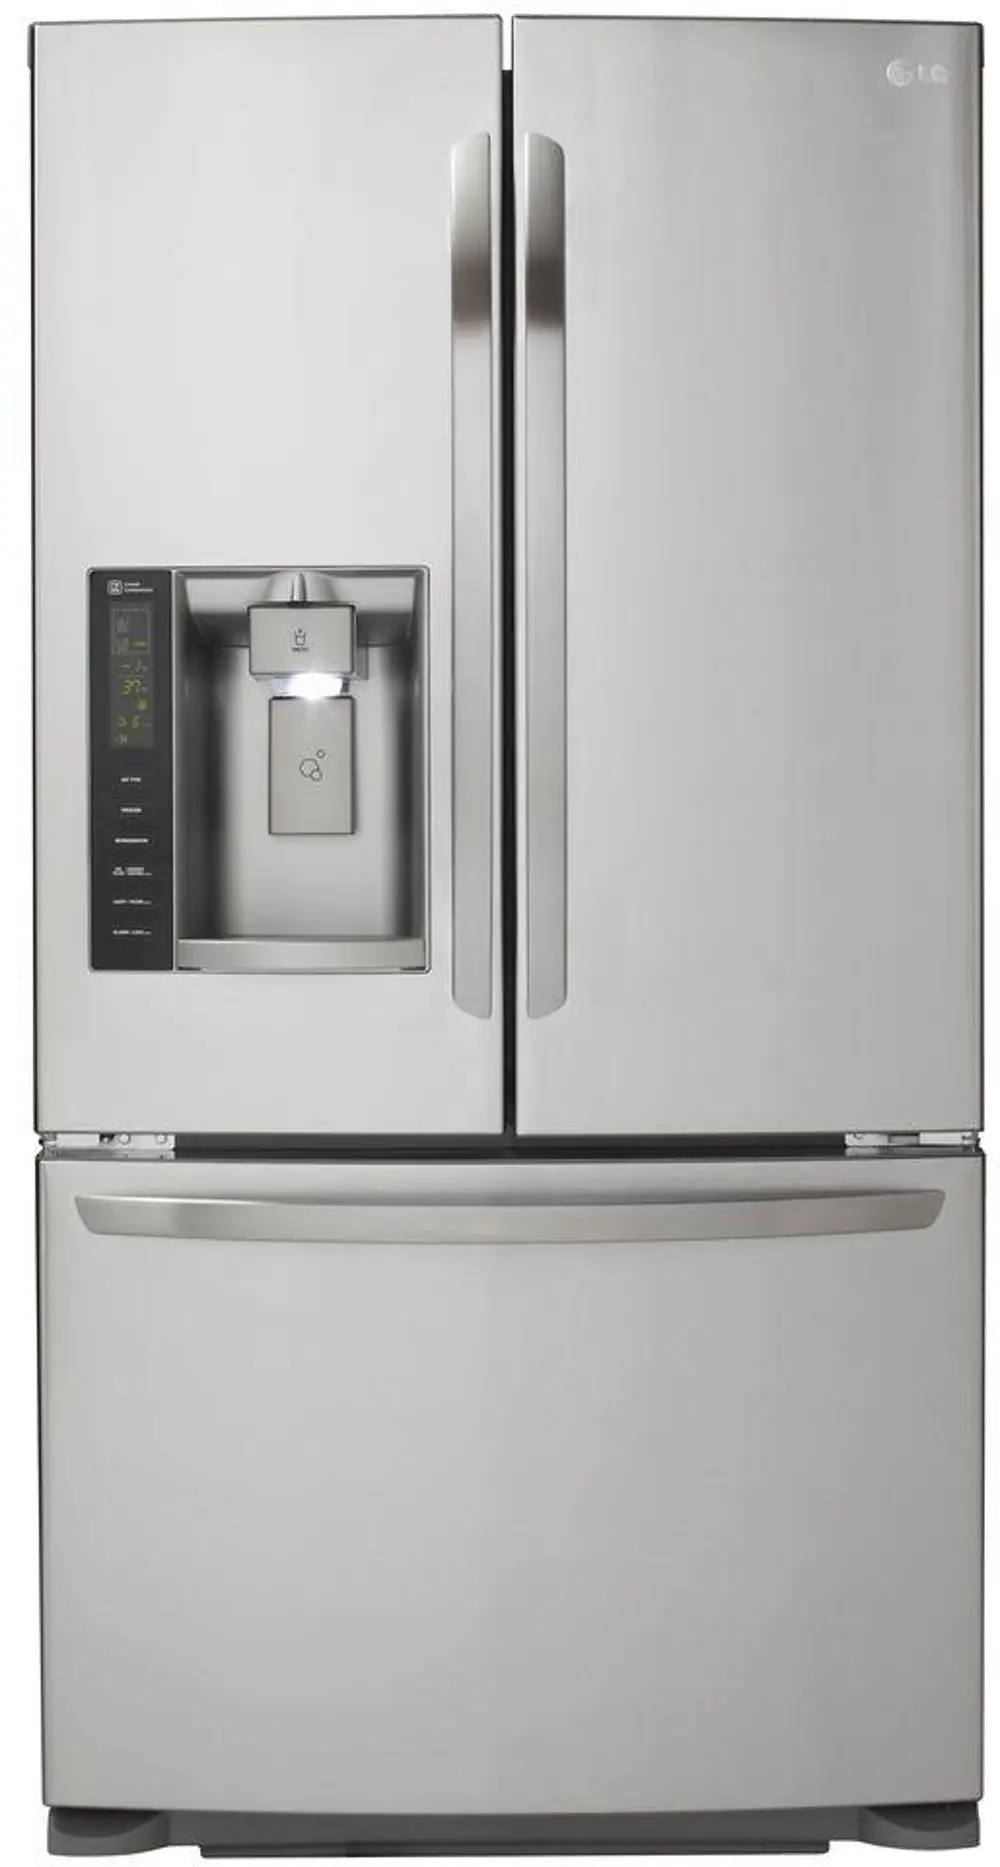 LFX25973ST LG 24.1 cu. ft. French Door Refrigerator with Dual Ice Makers - 36 Inch Stainless Steel-1